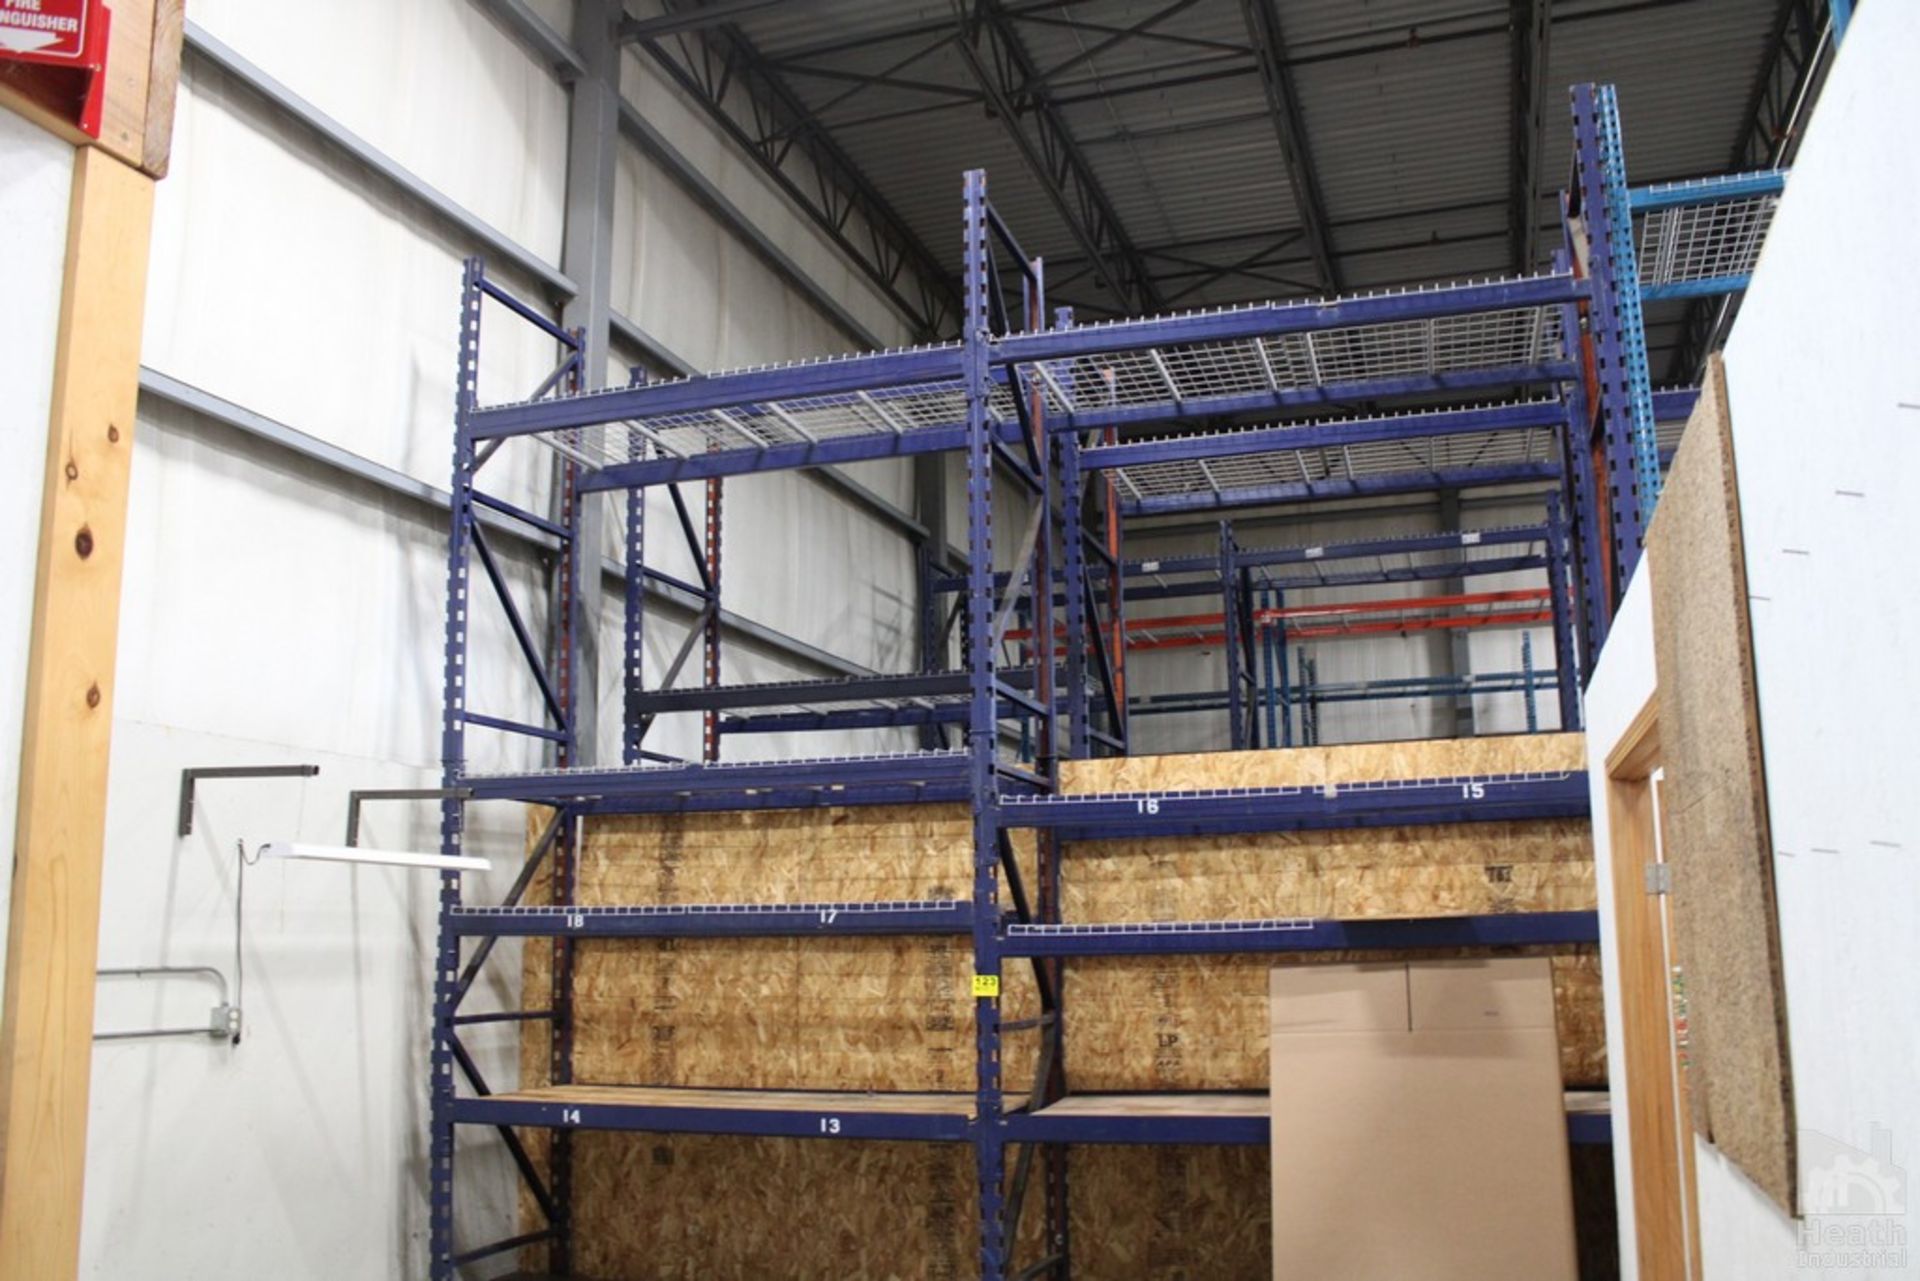 (2) SECTIONS OF HOOK STYLE PALLET RACK, WITH WIRE DECKING AND PLYWOOD, 8' X 40" X 16' HIGH